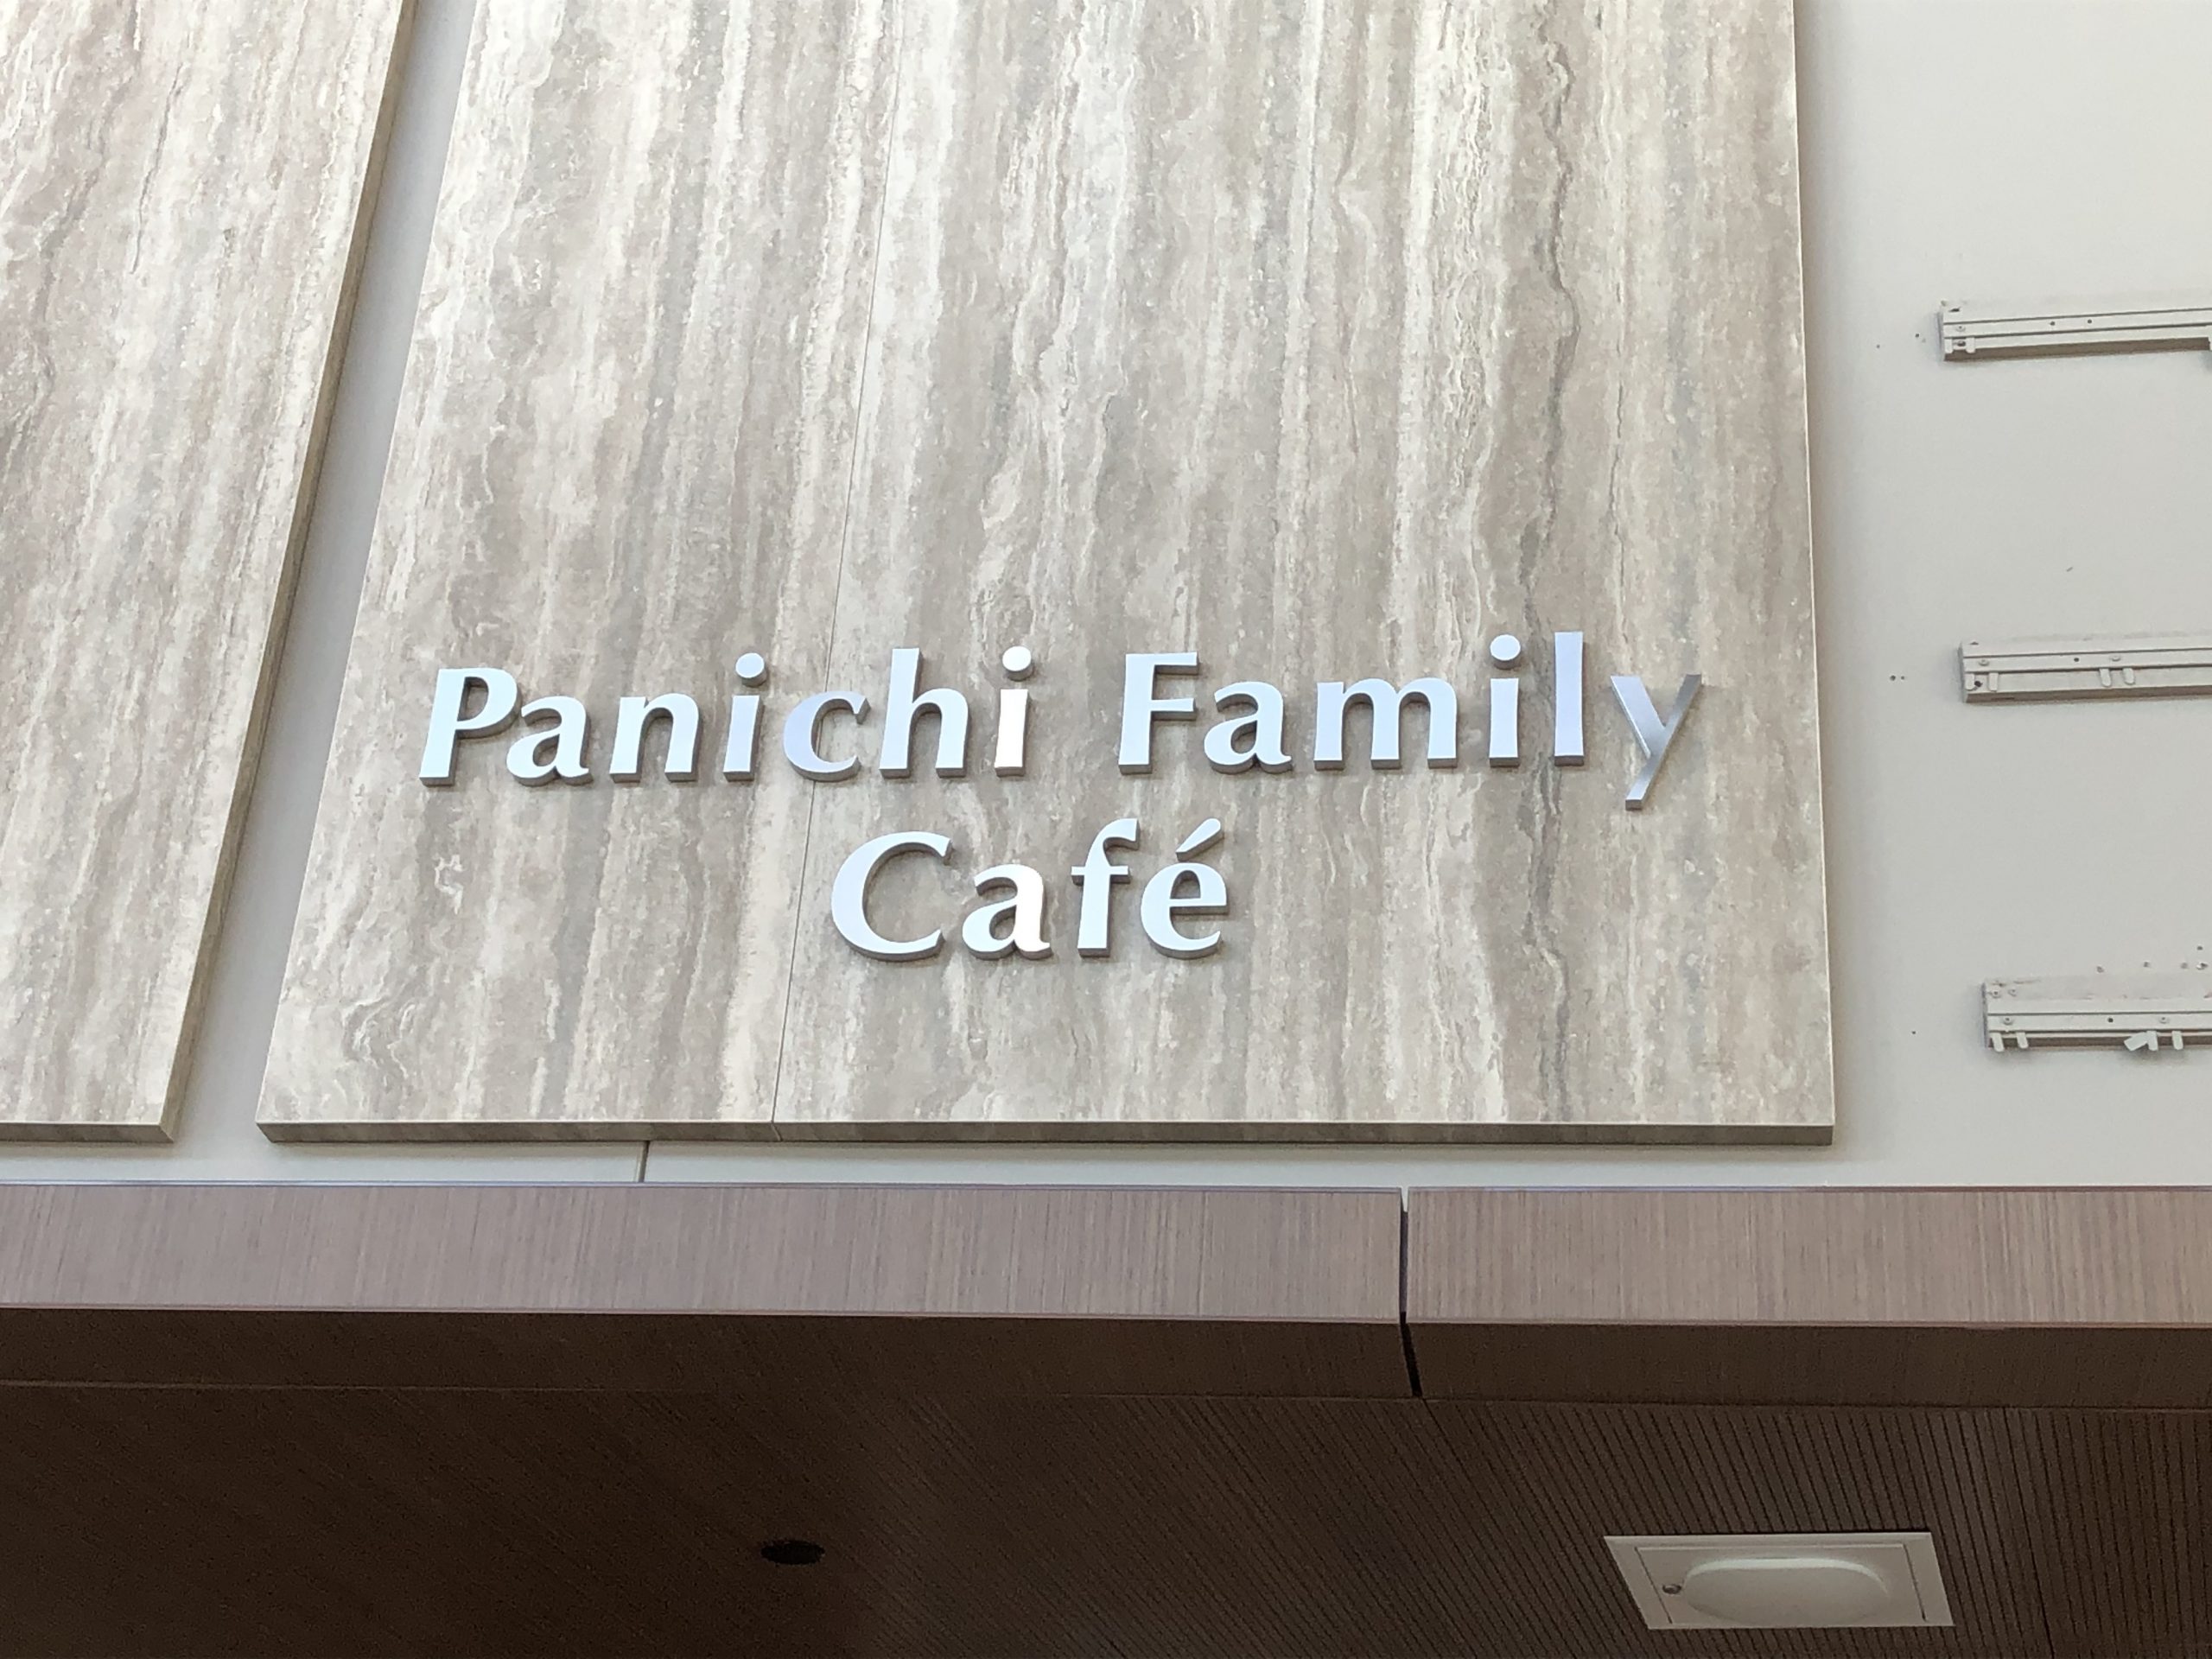 Sign with text panichi family cafe